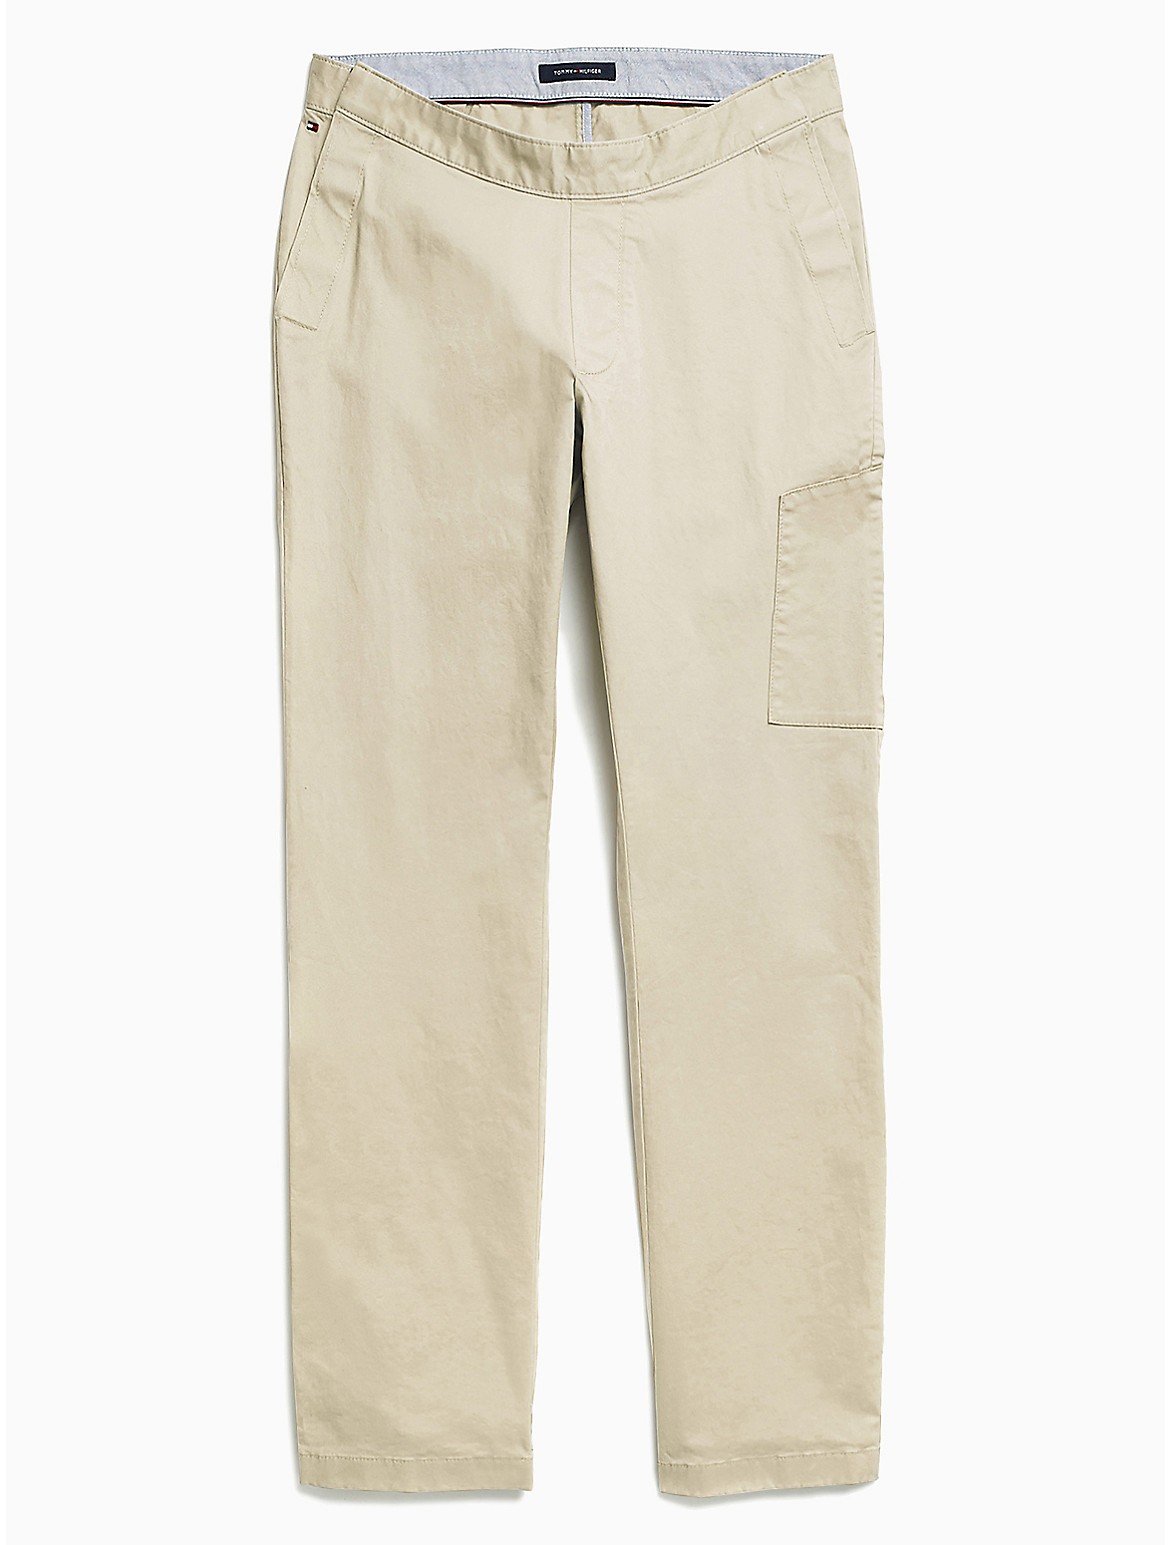 Tommy Hilfiger Seated Fit Classic Chino In Sand Khaki